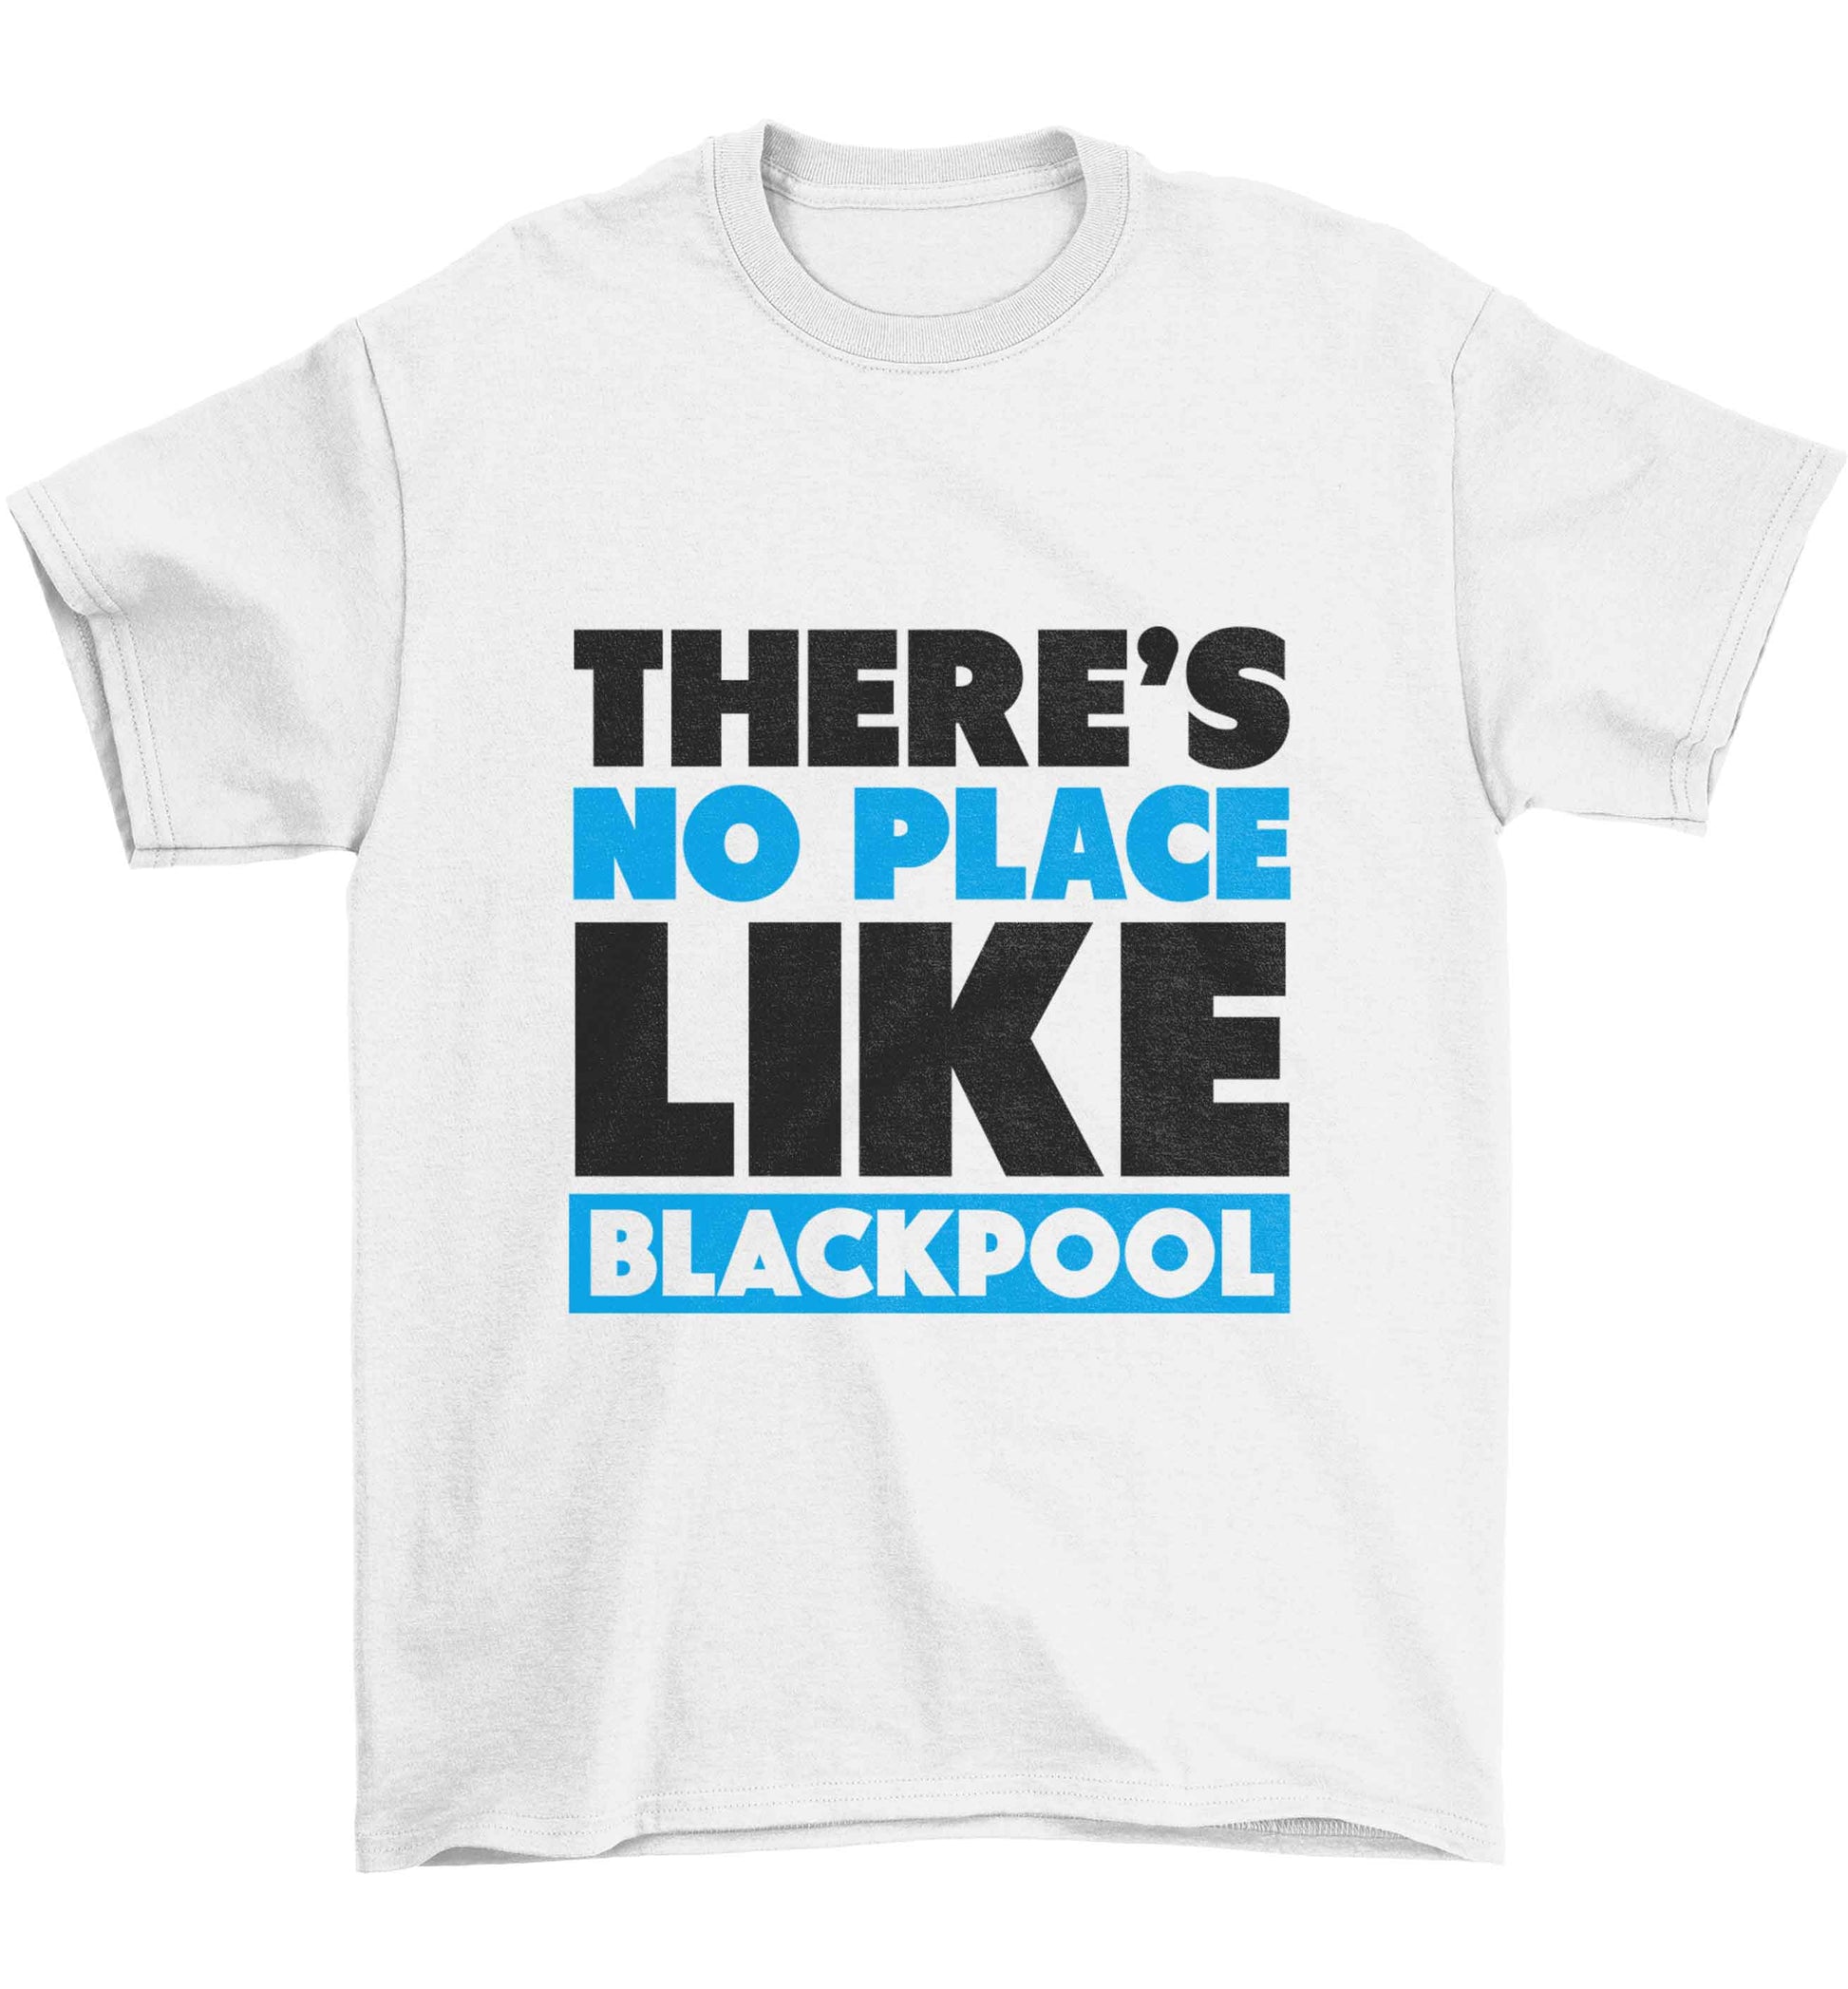 There's no place like Blackpool Children's white Tshirt 12-13 Years